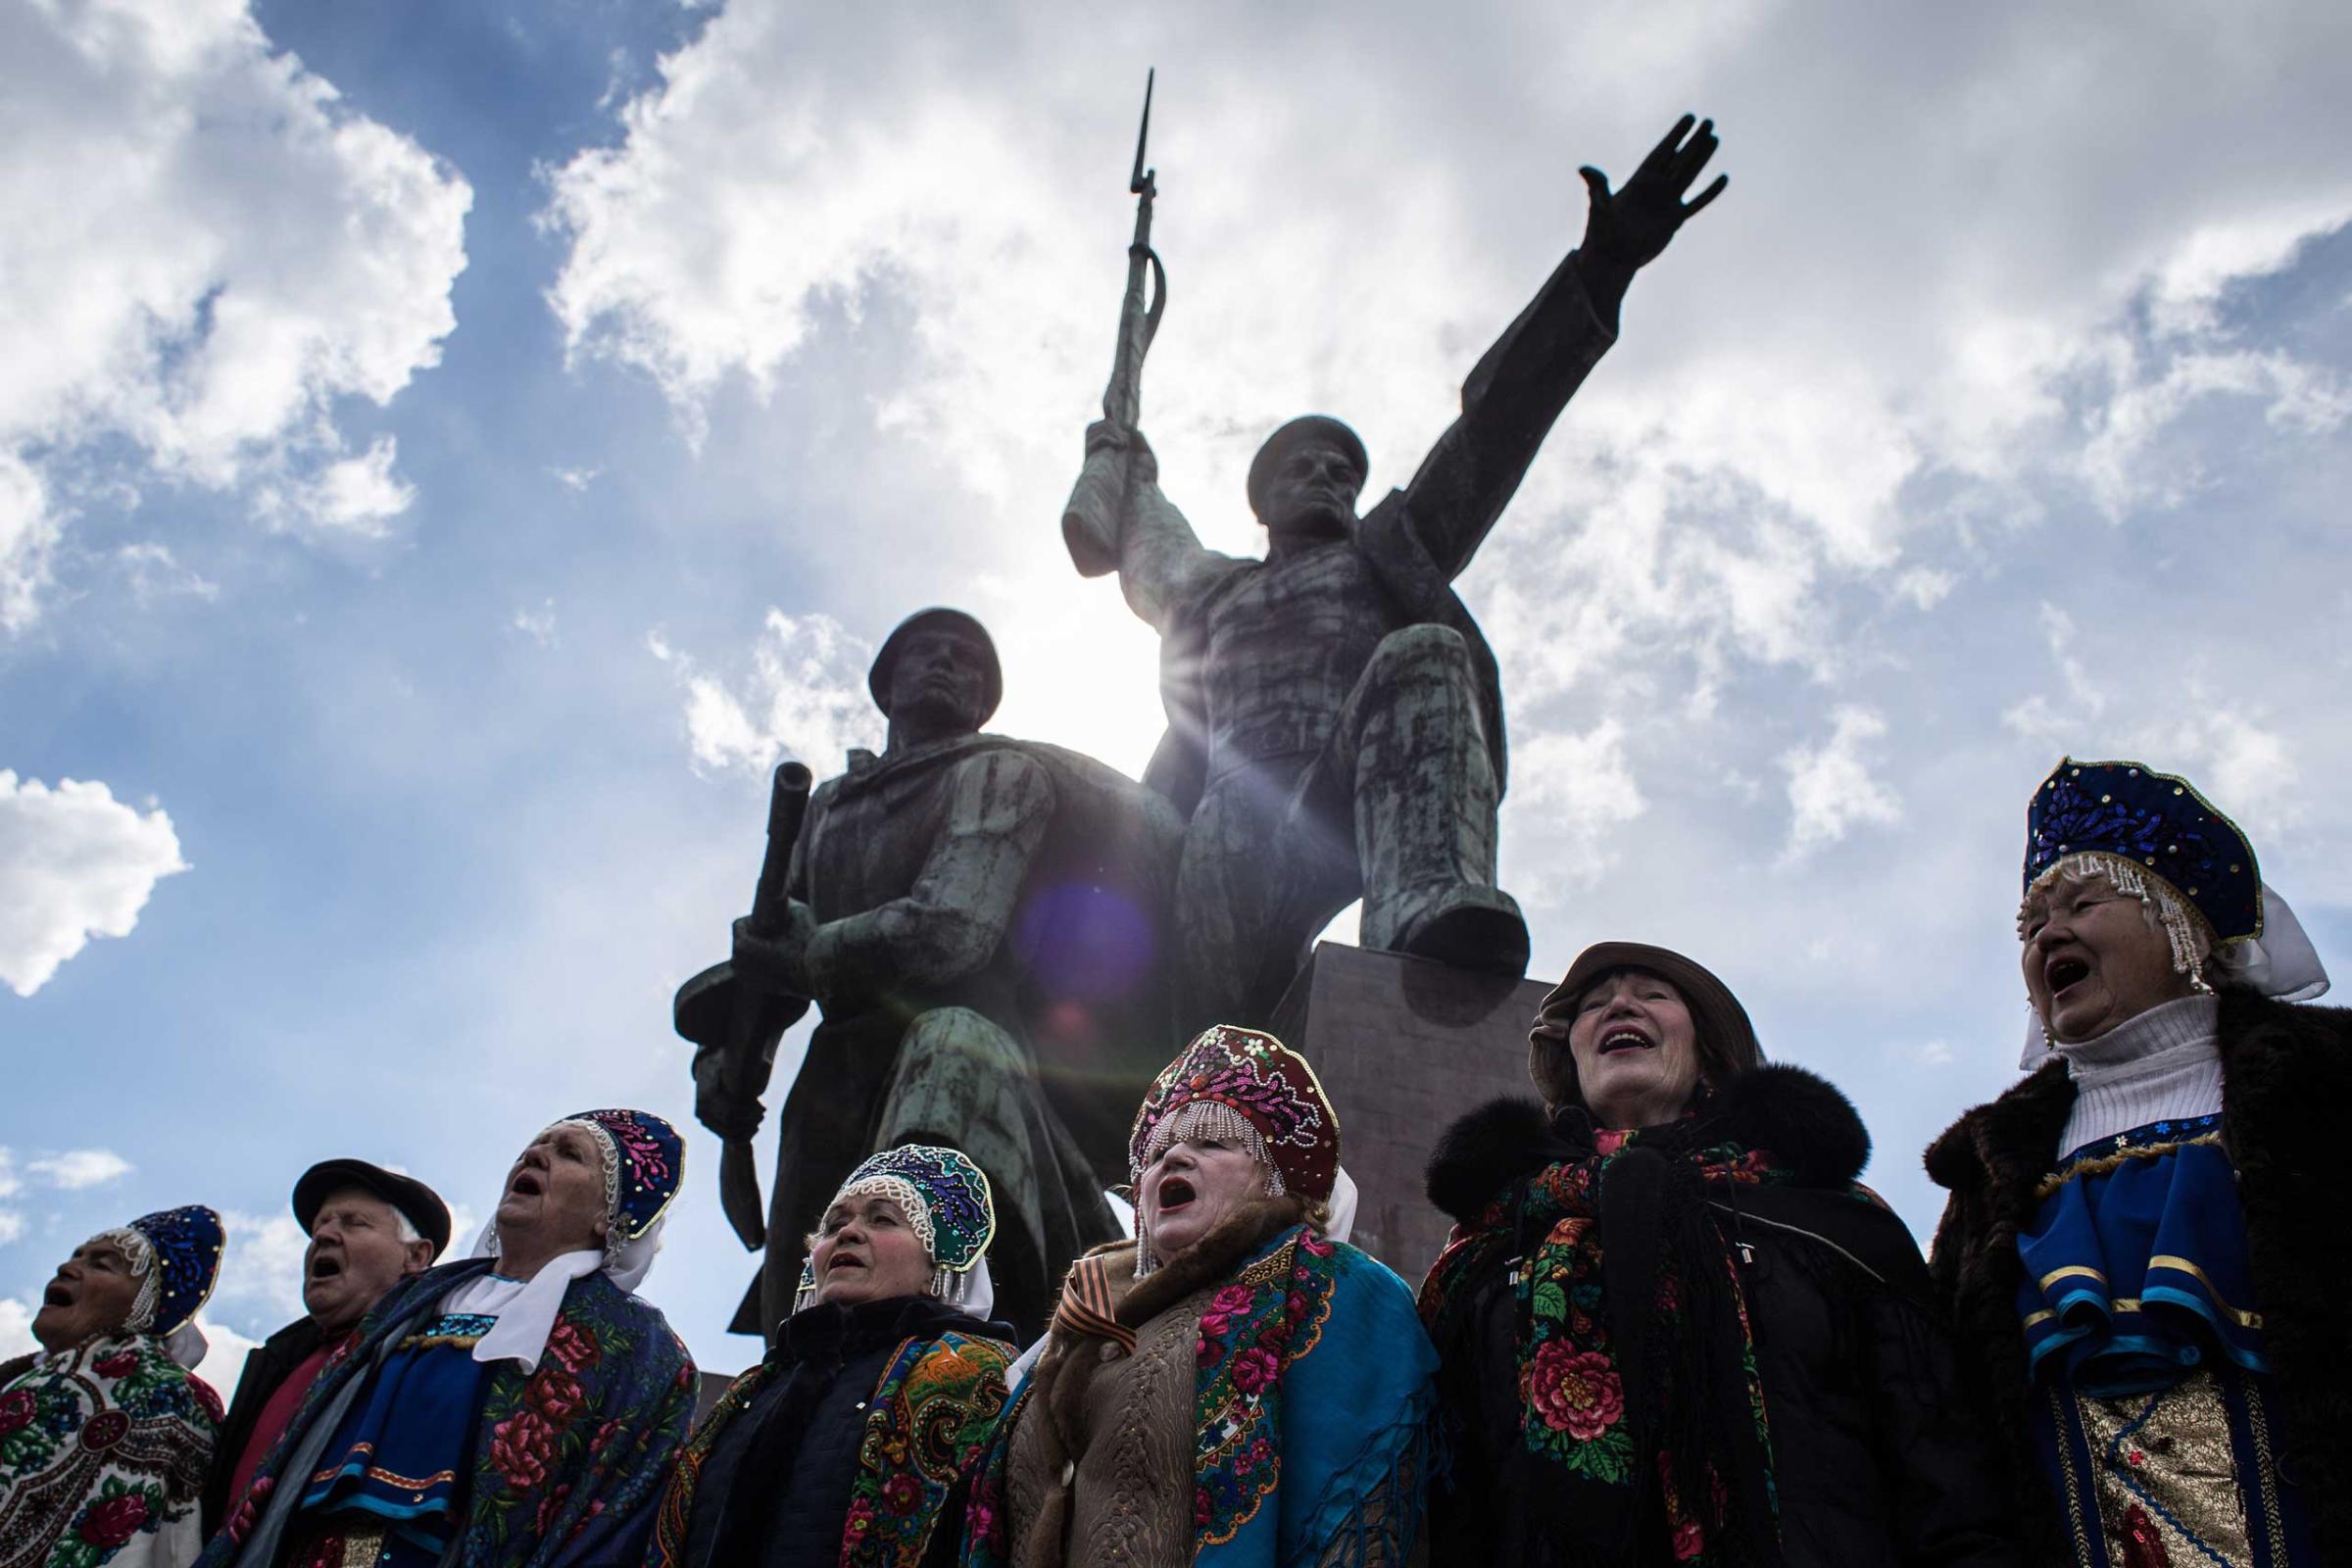 People sing on the first anniversary of the annexation to Russia, March 18, 2015 in Sevastopol.